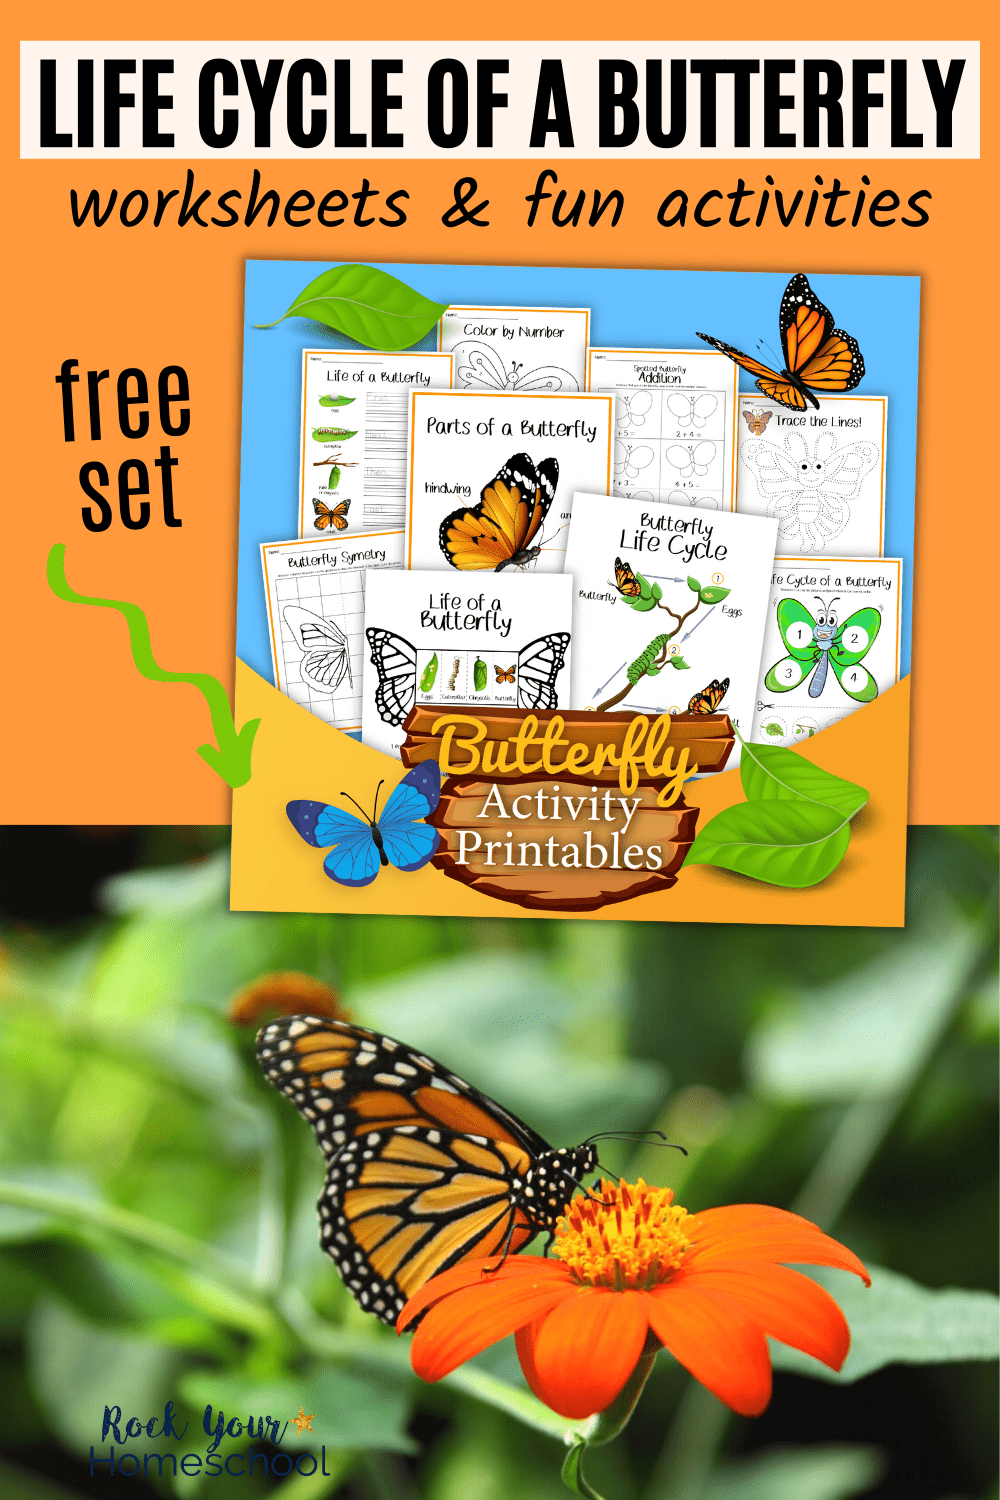 Life Cycle of a Butterfly Printables And Fun Activities (9 Free Worksheets)